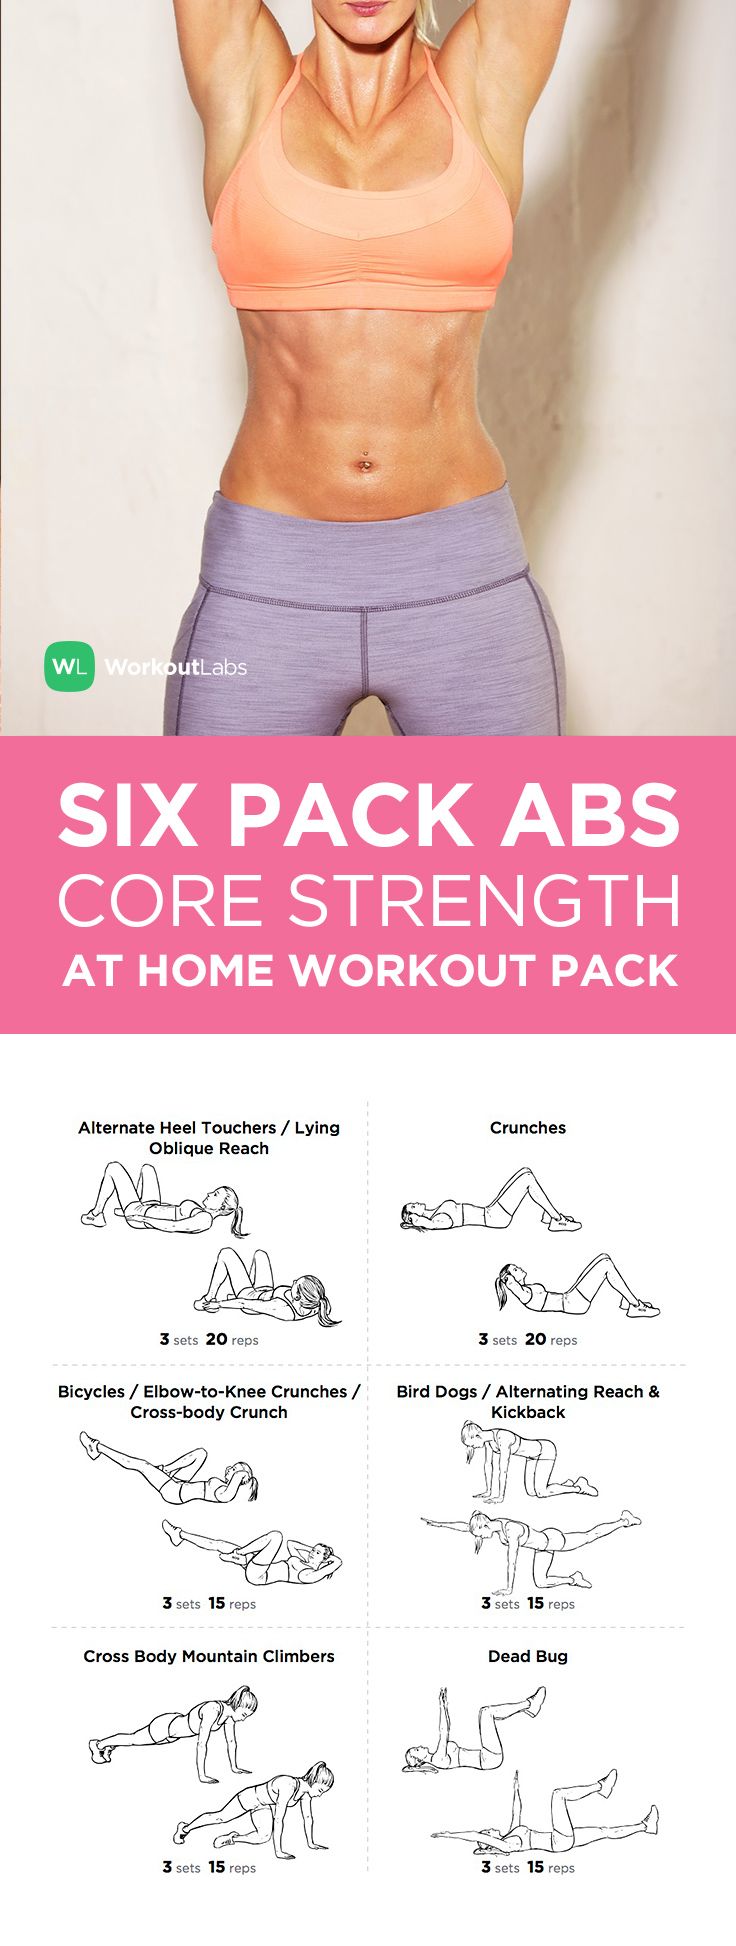 Six Pack ABS Core Strength At Home Workout Pack